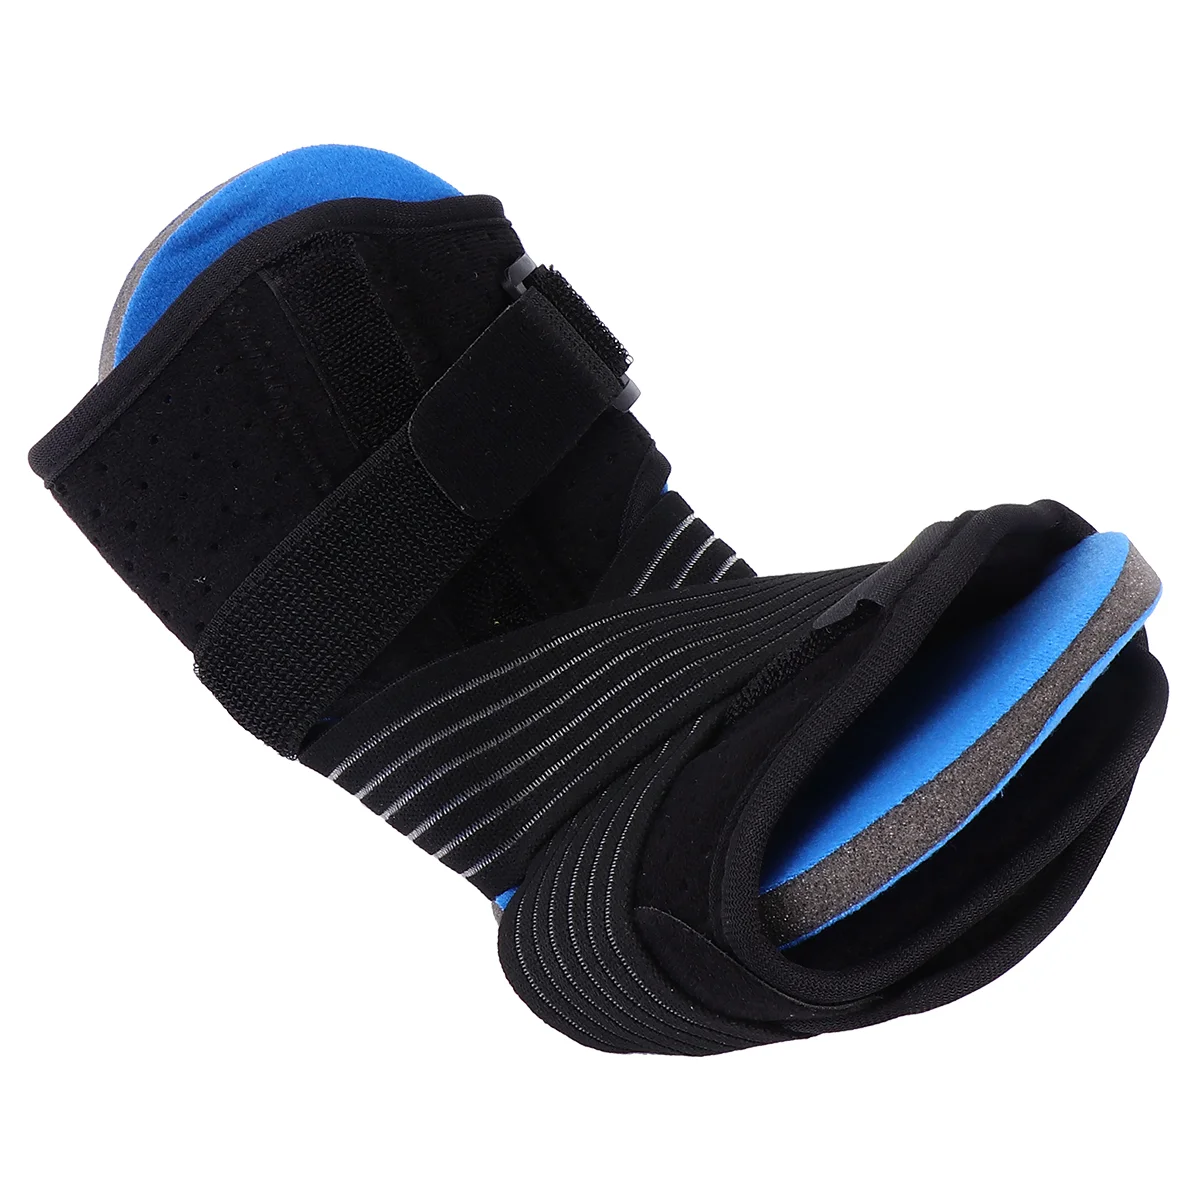 1 Set Practical Ankle Support Fixed Ankle Brace Ankle Sprain Support Foot Fracture Brace for Men